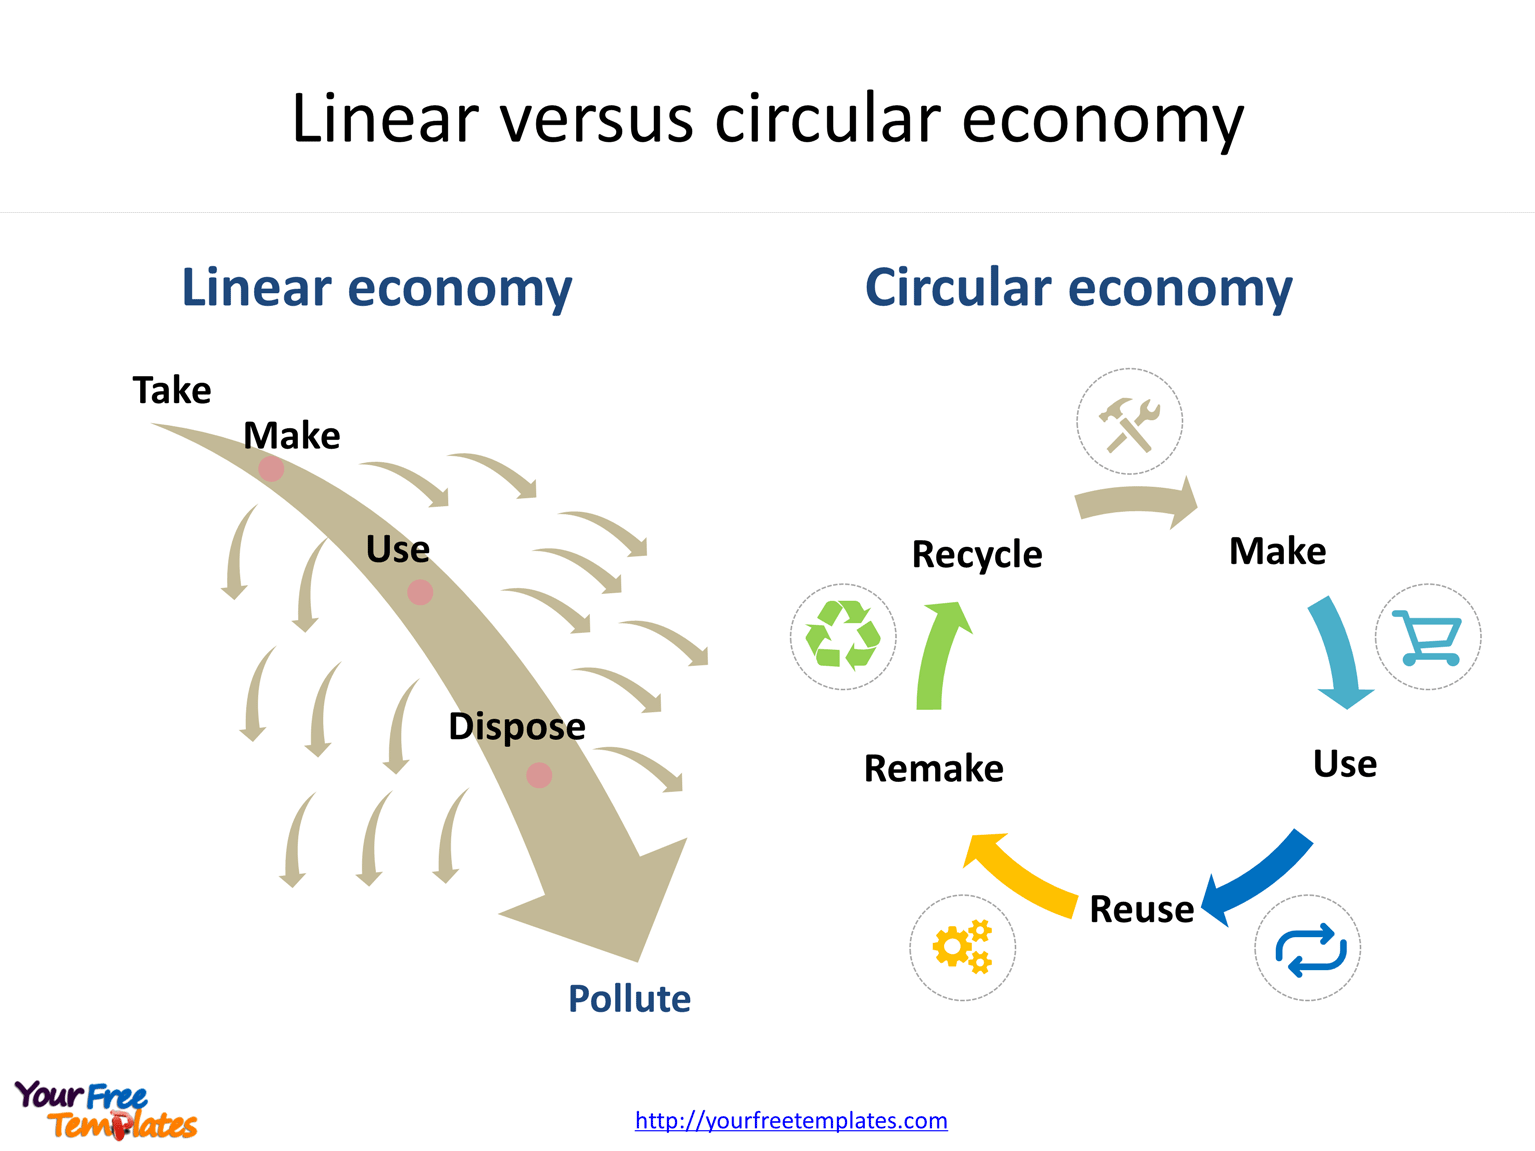 Circular economy is a new economy, which is totally different from the traditional linear economy. Human beings need to use circular business models to integrate the idea into the whole industry.